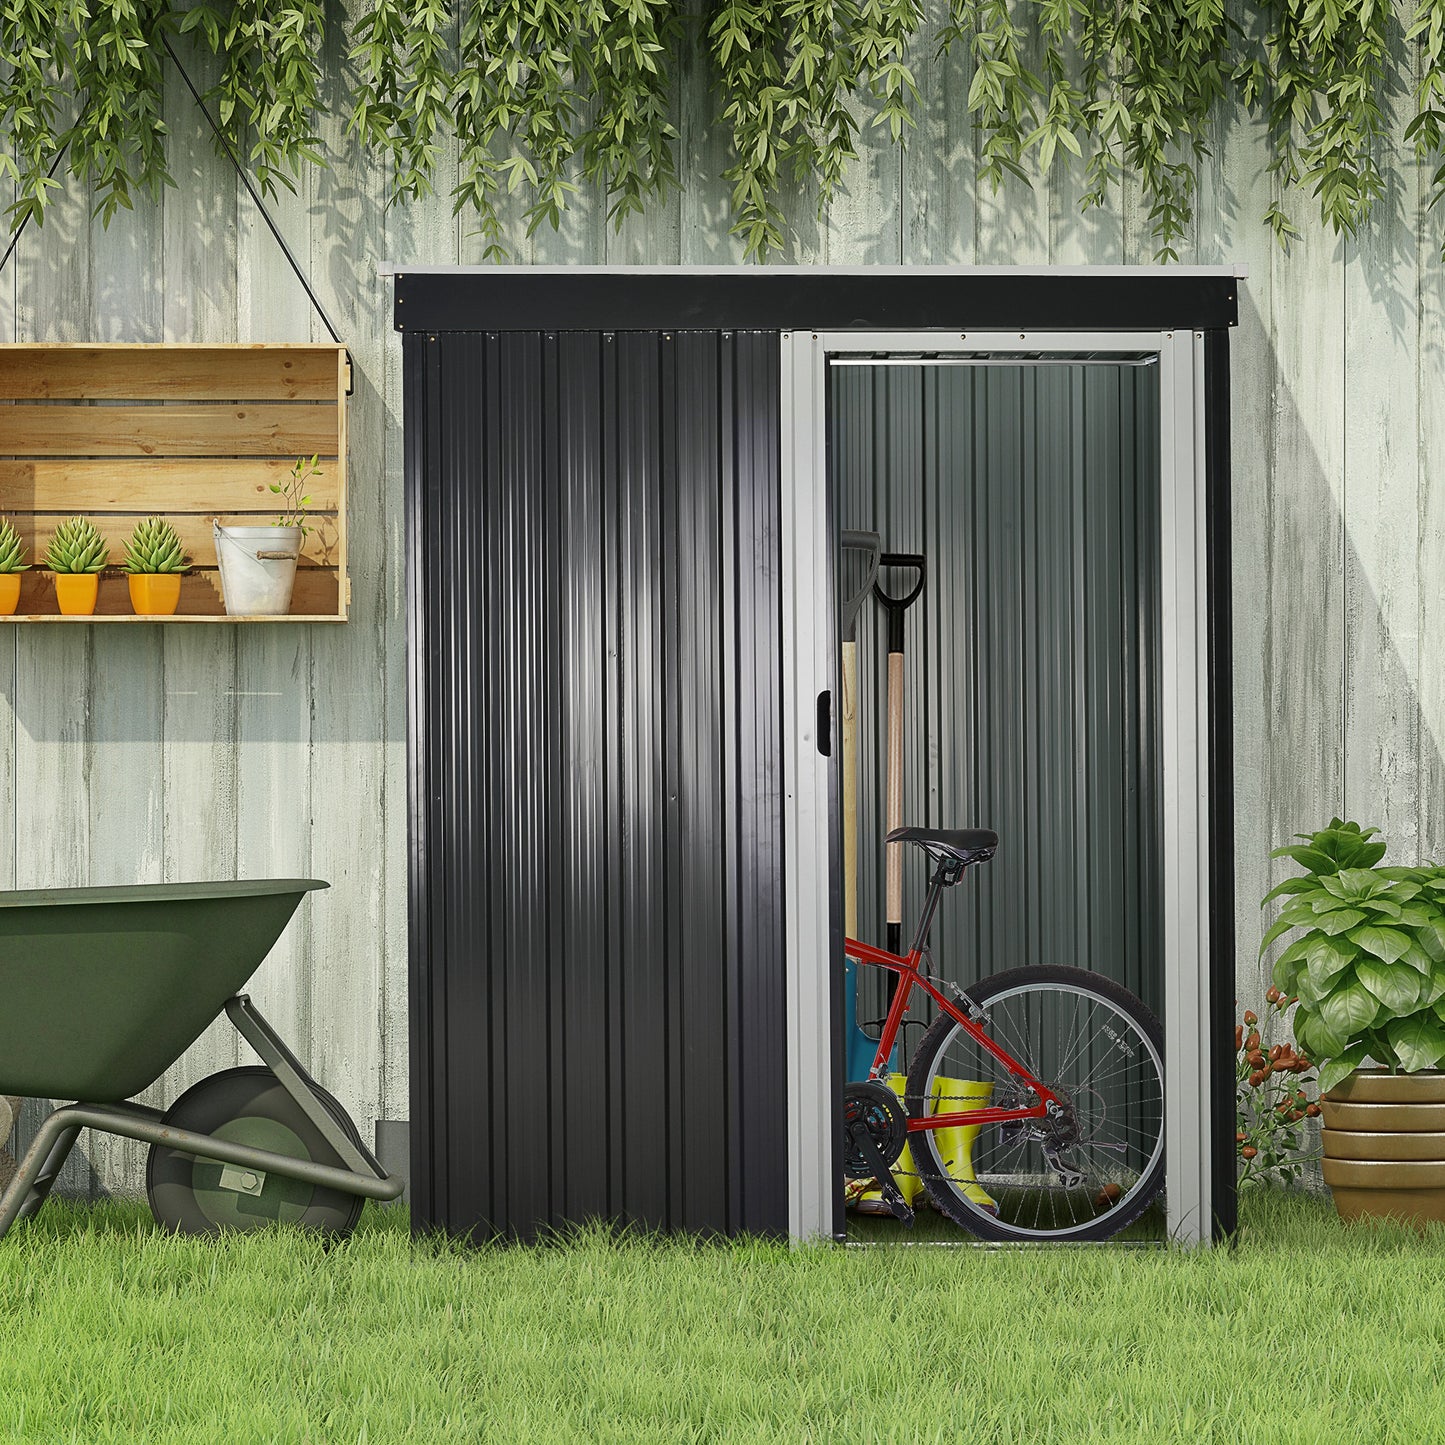 Outsunny 2 x 3ft Garden Storage Shed with Sliding Door and Sloped Roof Outdoor Equipment Tool Backyard, Black